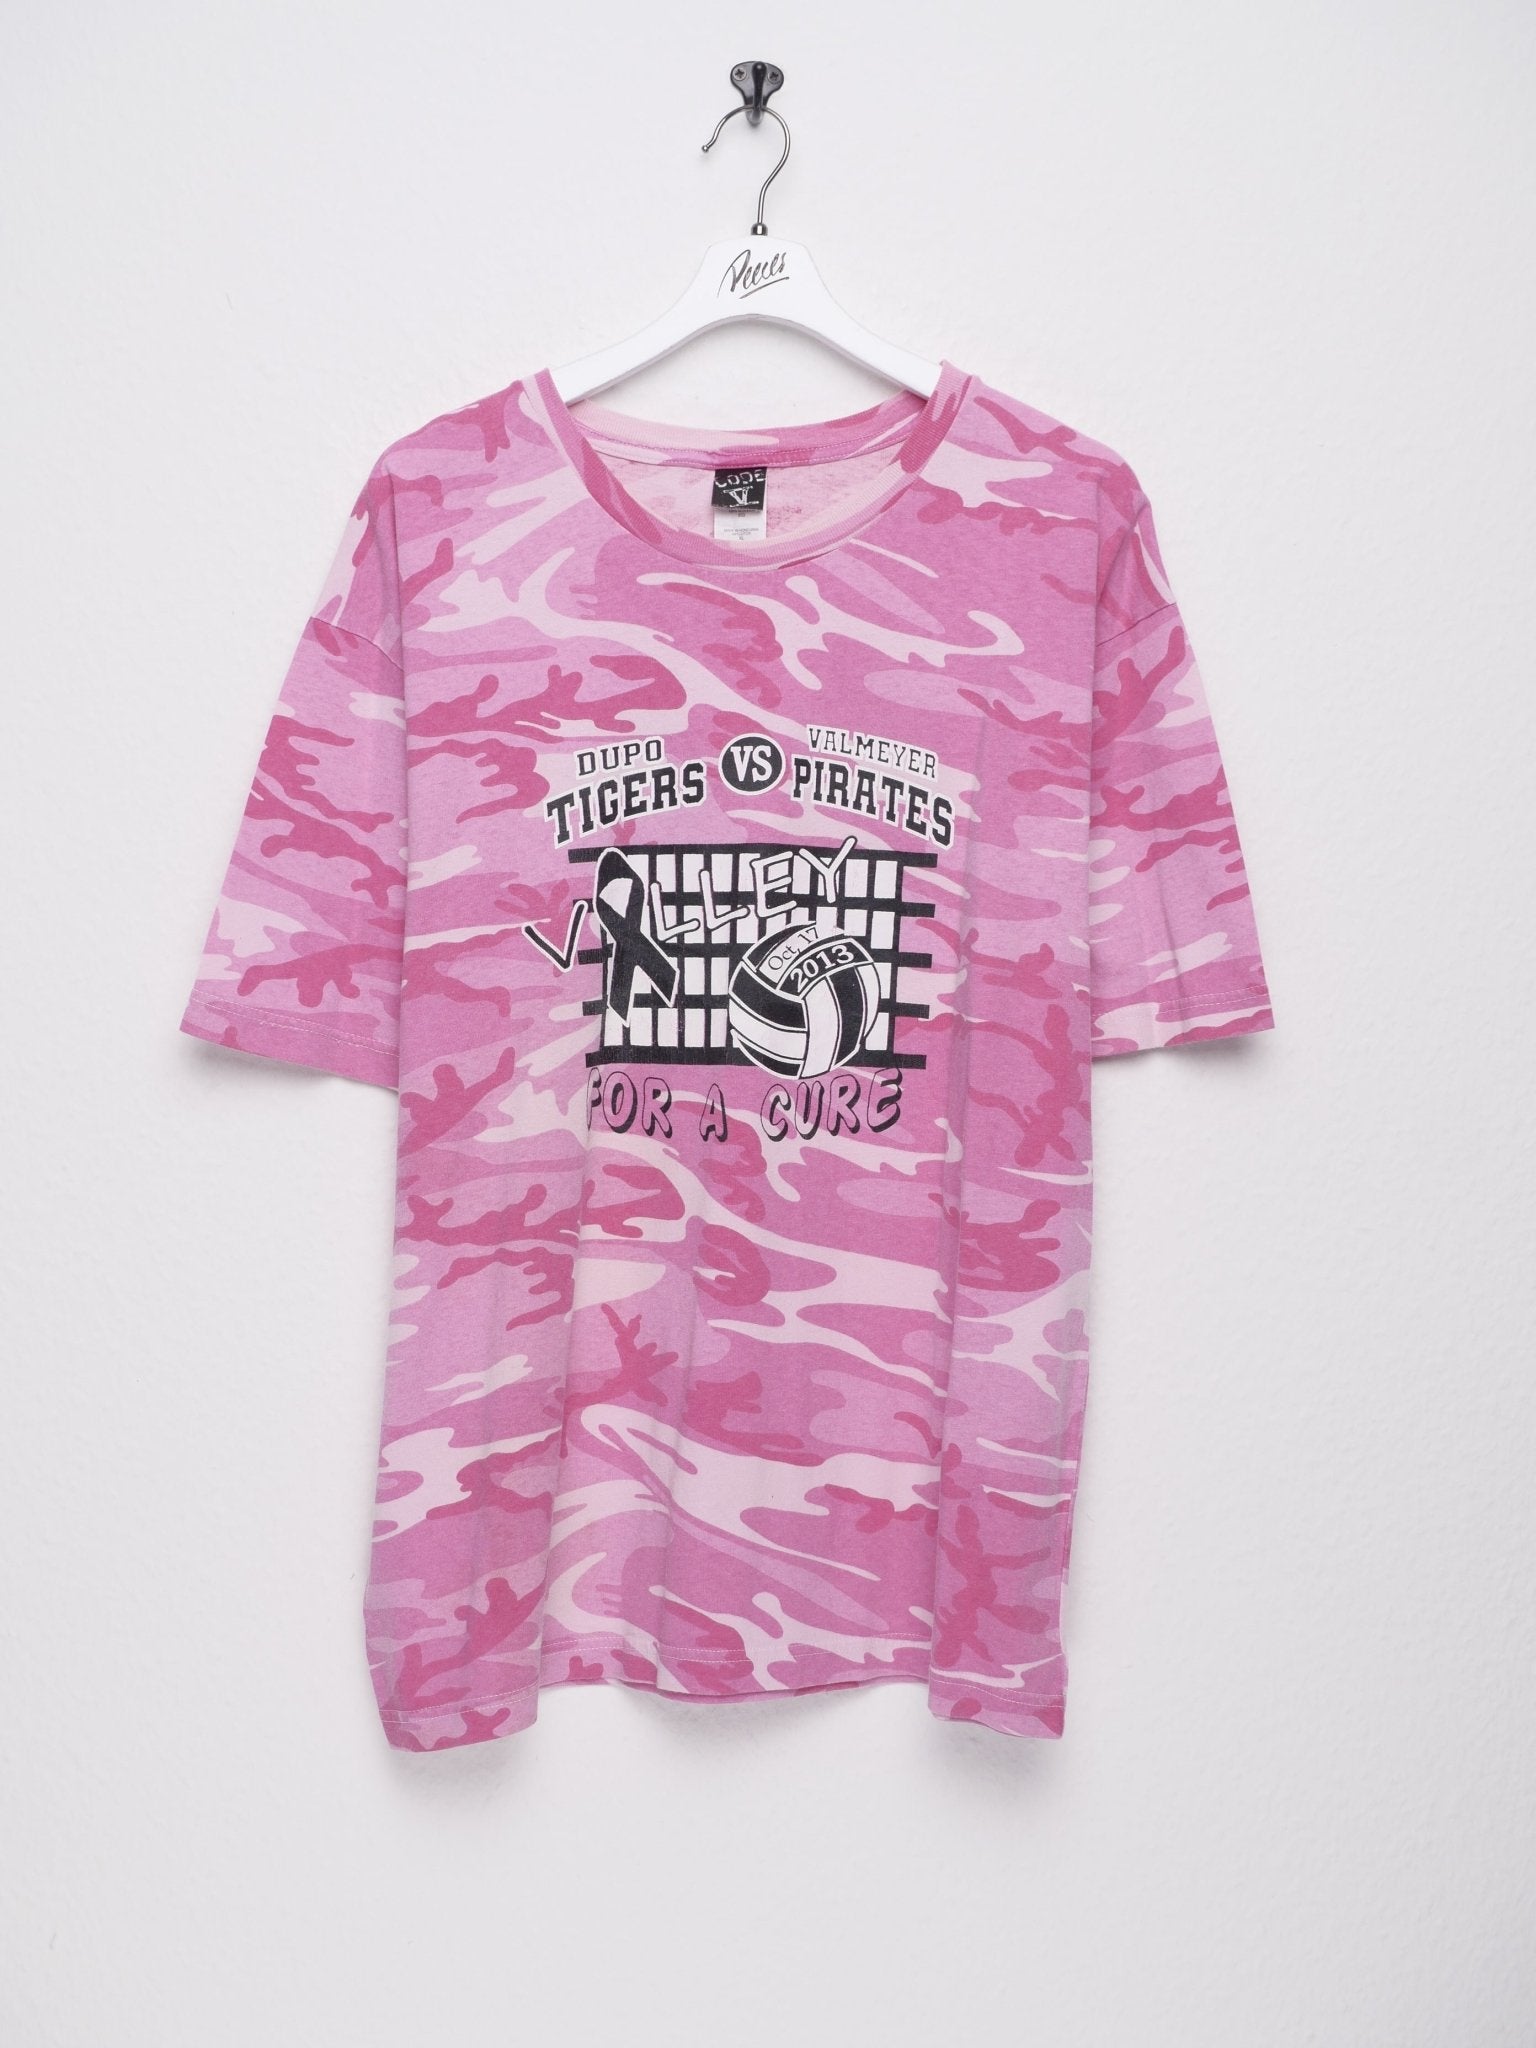 Dupo Tigers vs Valmeyer Pirates printed Spellout pink camouflage Shirt - Peeces